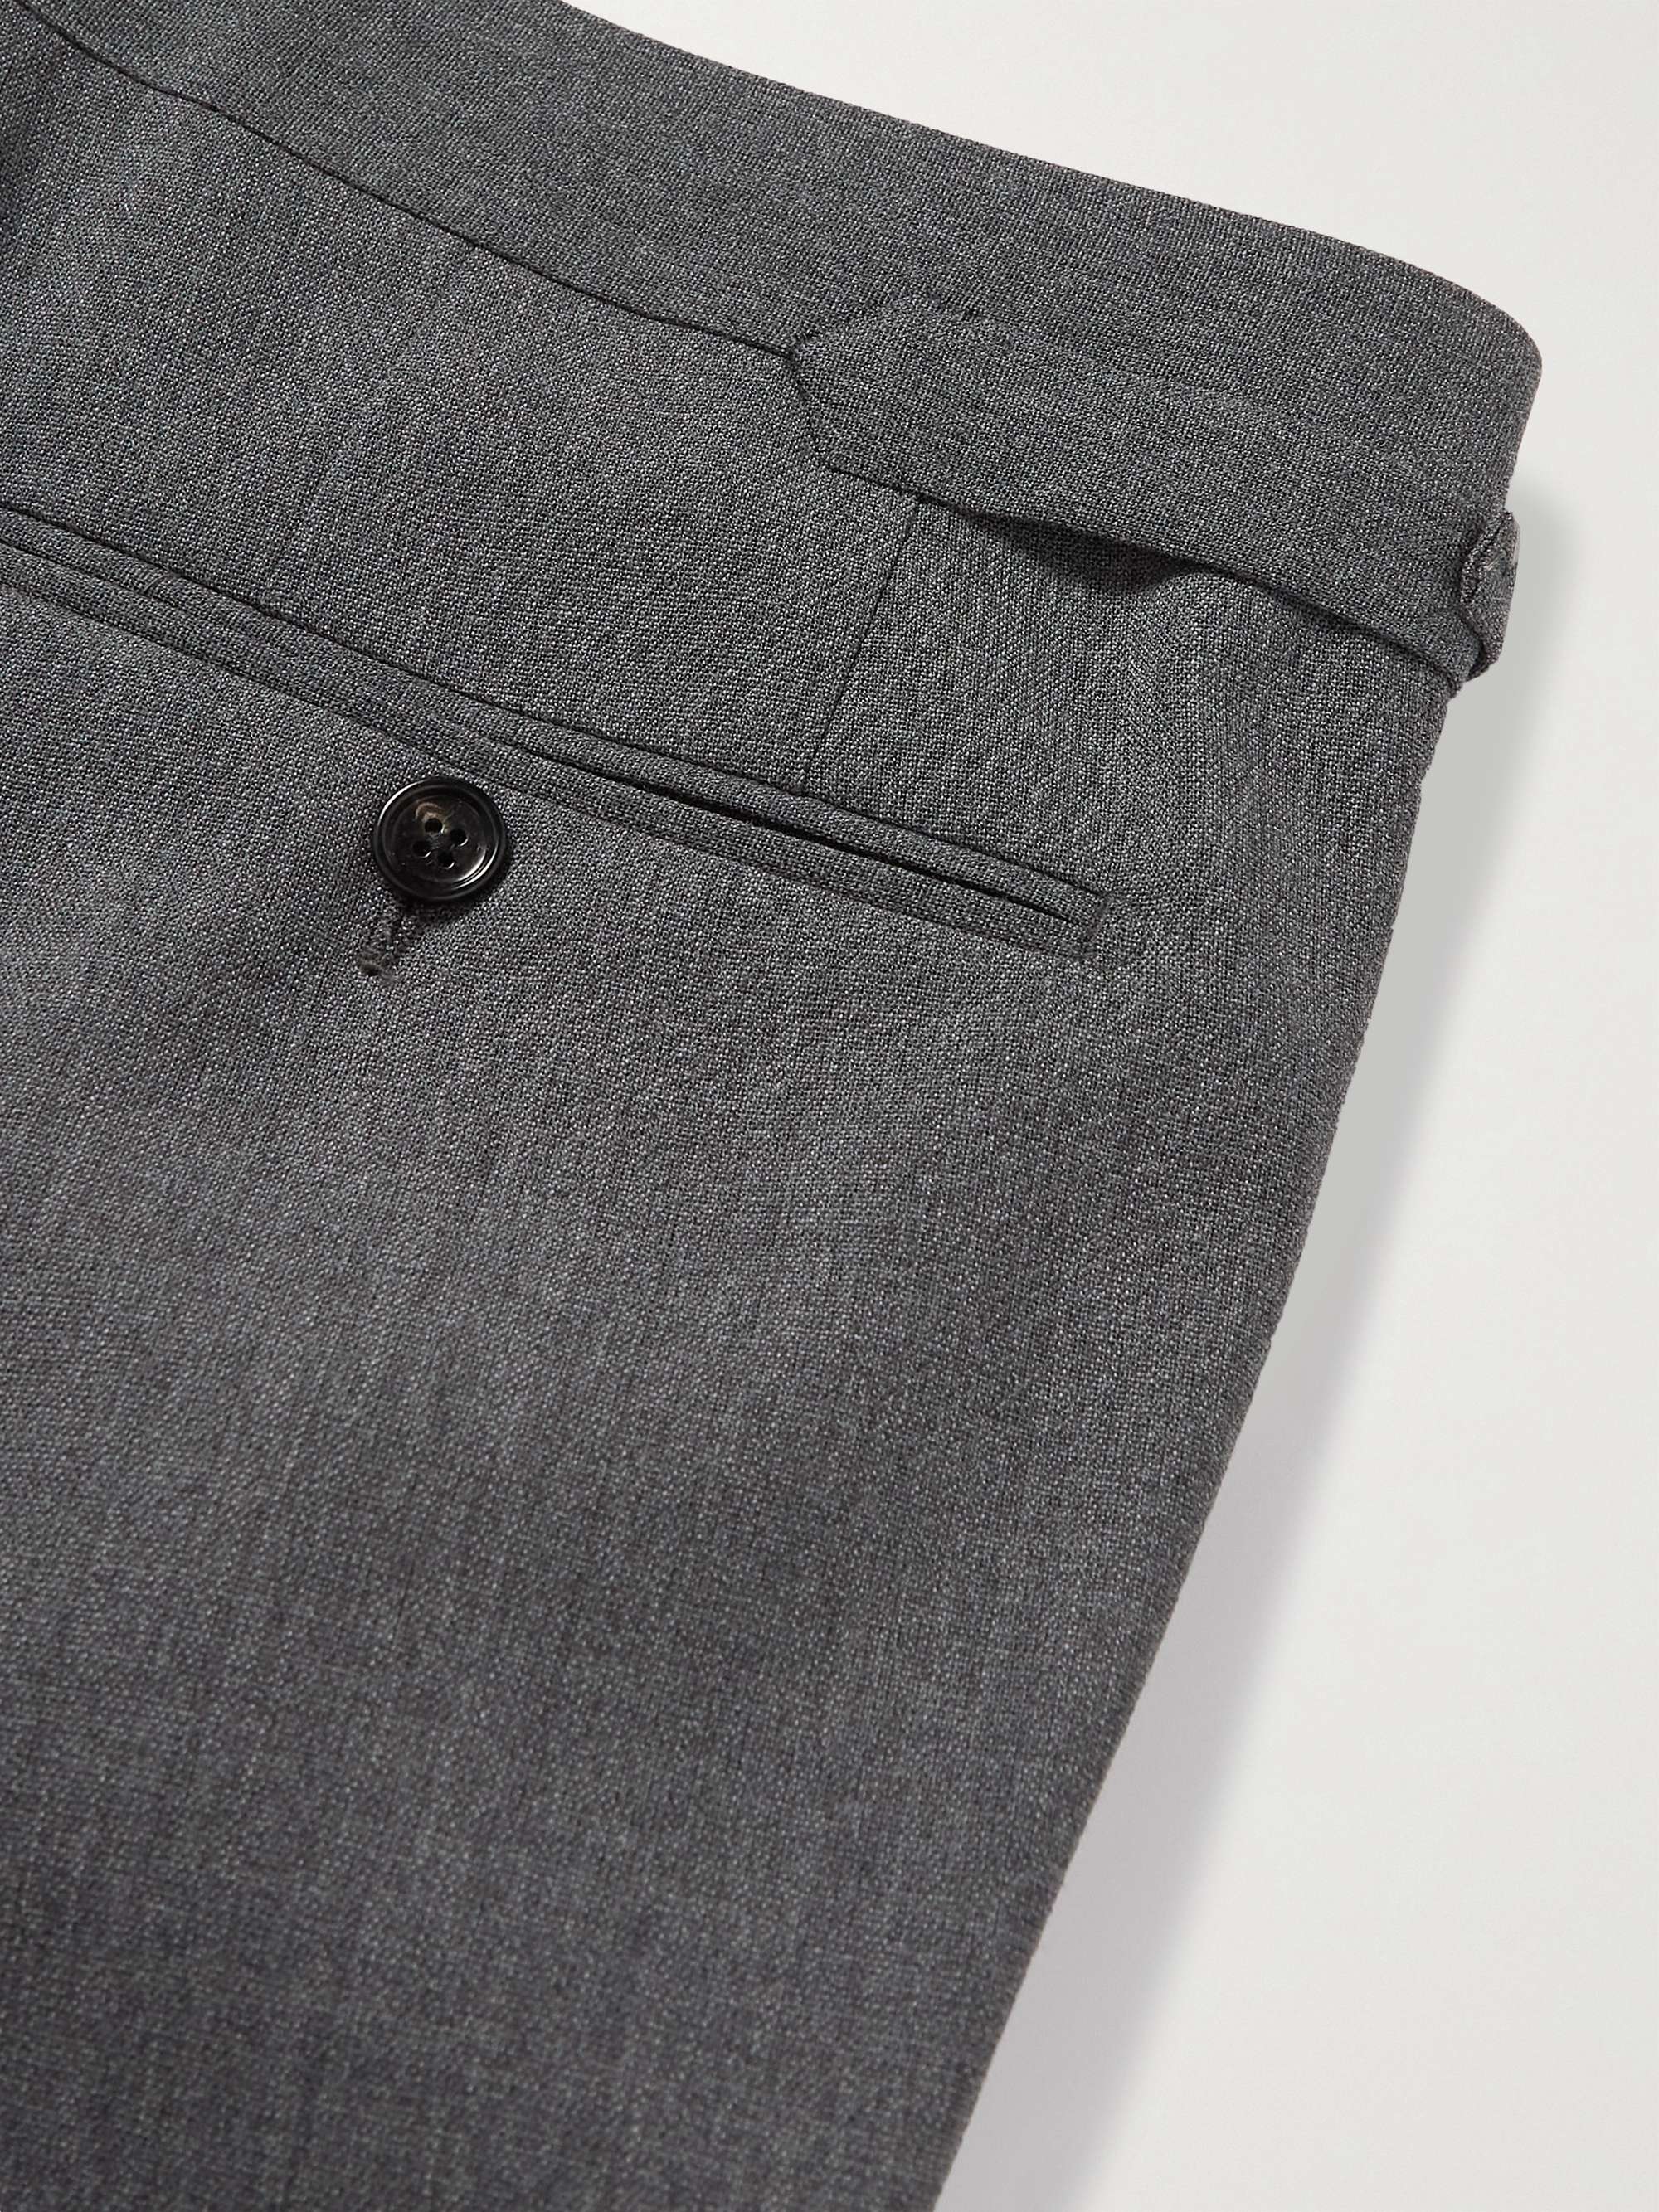 TOM FORD O'Connor Slim-Fit Wool Suit Trousers